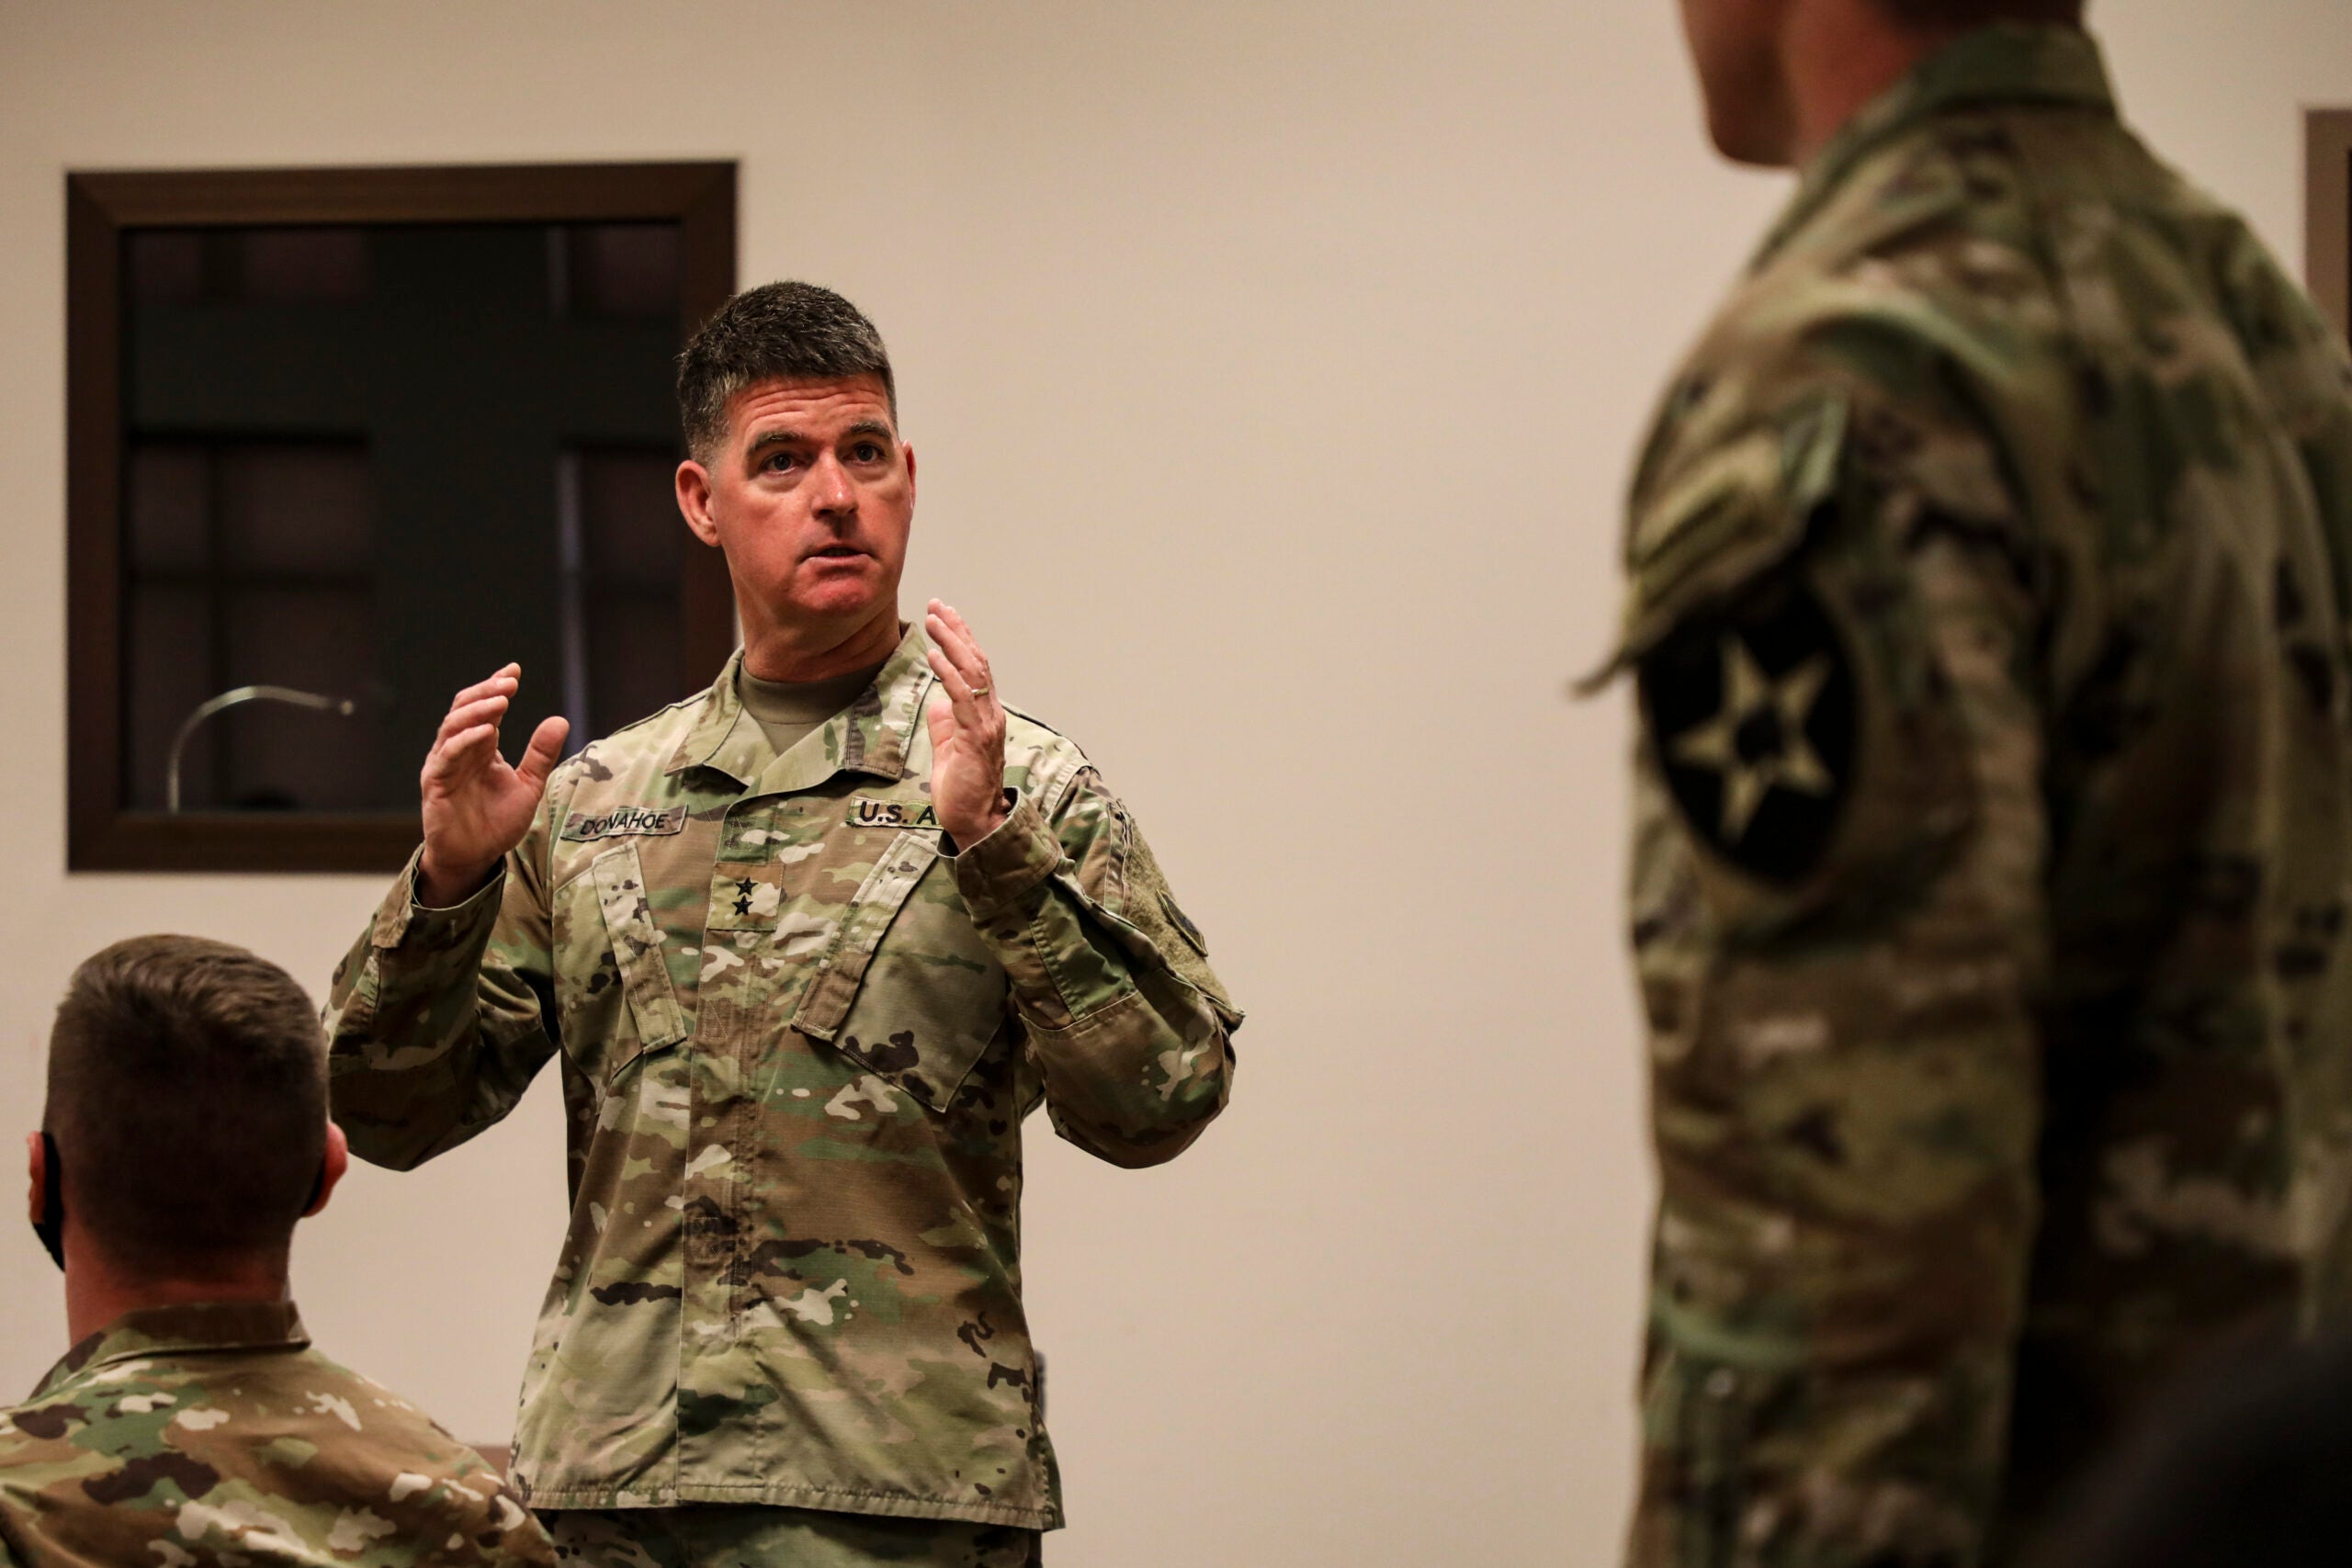 Maj. Gen. Patrick Donahoe, Eighth Army’s operations general officer, speaks to the 30 competitors of this year’s Eighth Army Best Warrior Competition at Camp Humphreys, May 30. The Eighth Army BWC is the first major training event after U.S. Forces Korea downgraded the health protection condition to HPCON B. COVID-19 mitigations are still in effect during the Eighth Army’s BWC, such as appropriate social distancing, the use of masks and gloves, and sanitation procedures. (U.S. Photo by Sgt. Steven Close)